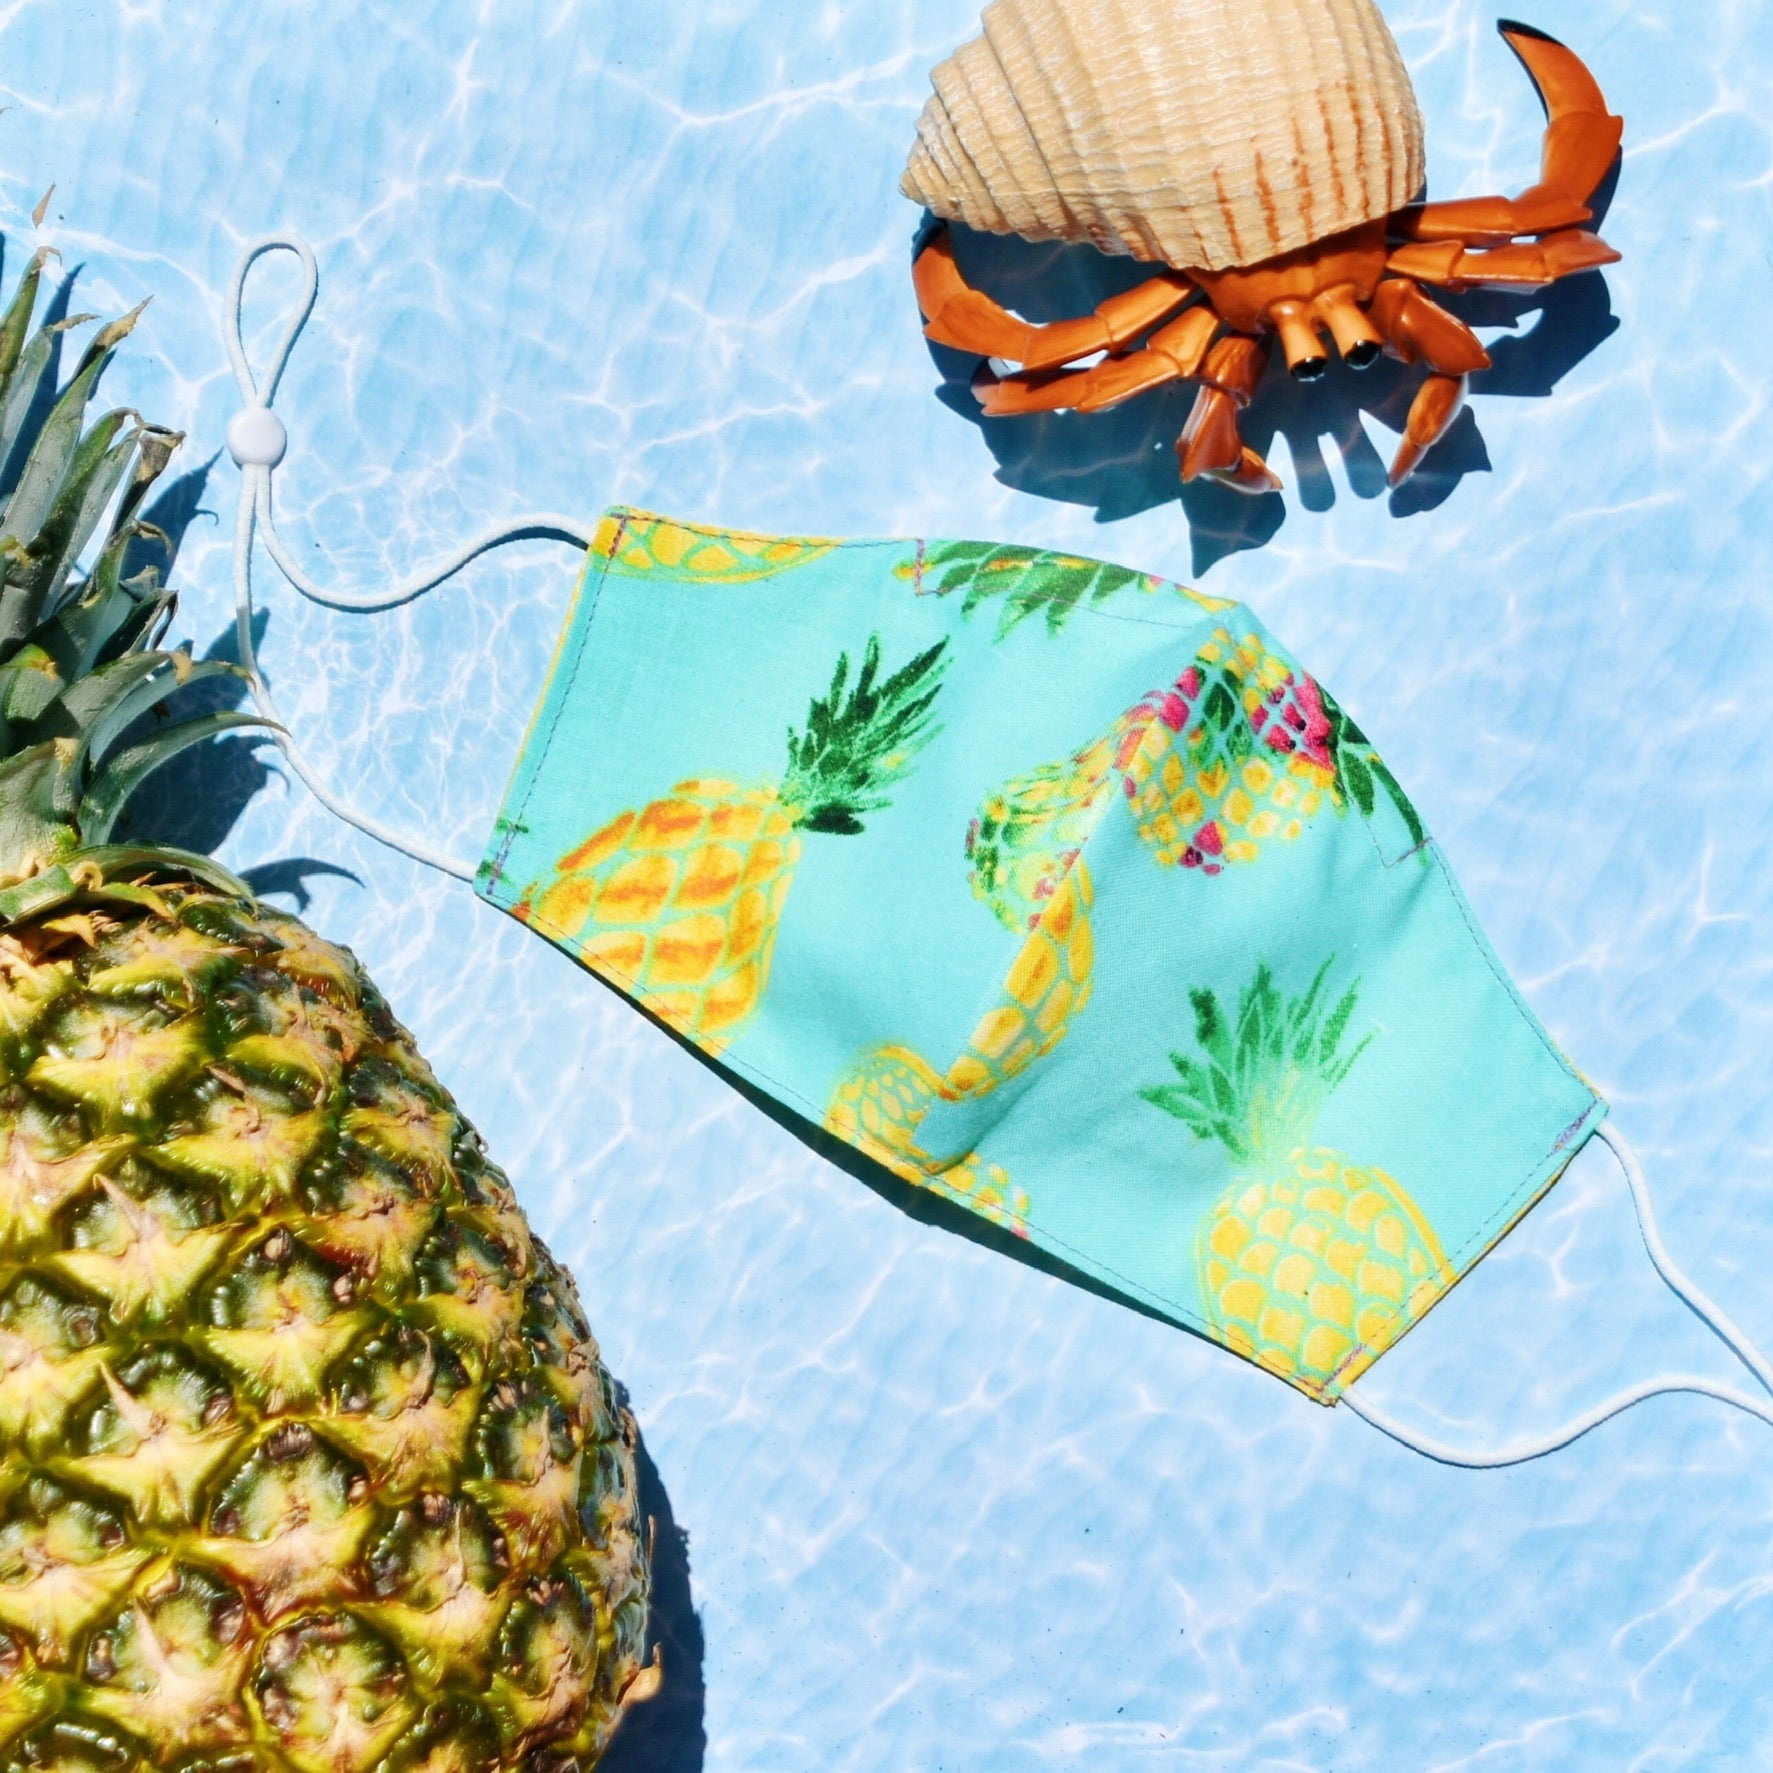 The cotton fabric’s vibrant shades of turquoise and yellow on our eye-catching pineapple print mask lets you take summer with you wherever you go.  Reversible and double-layered. Built for comfort with an adjustable nose bridge and adjustable ear straps. 